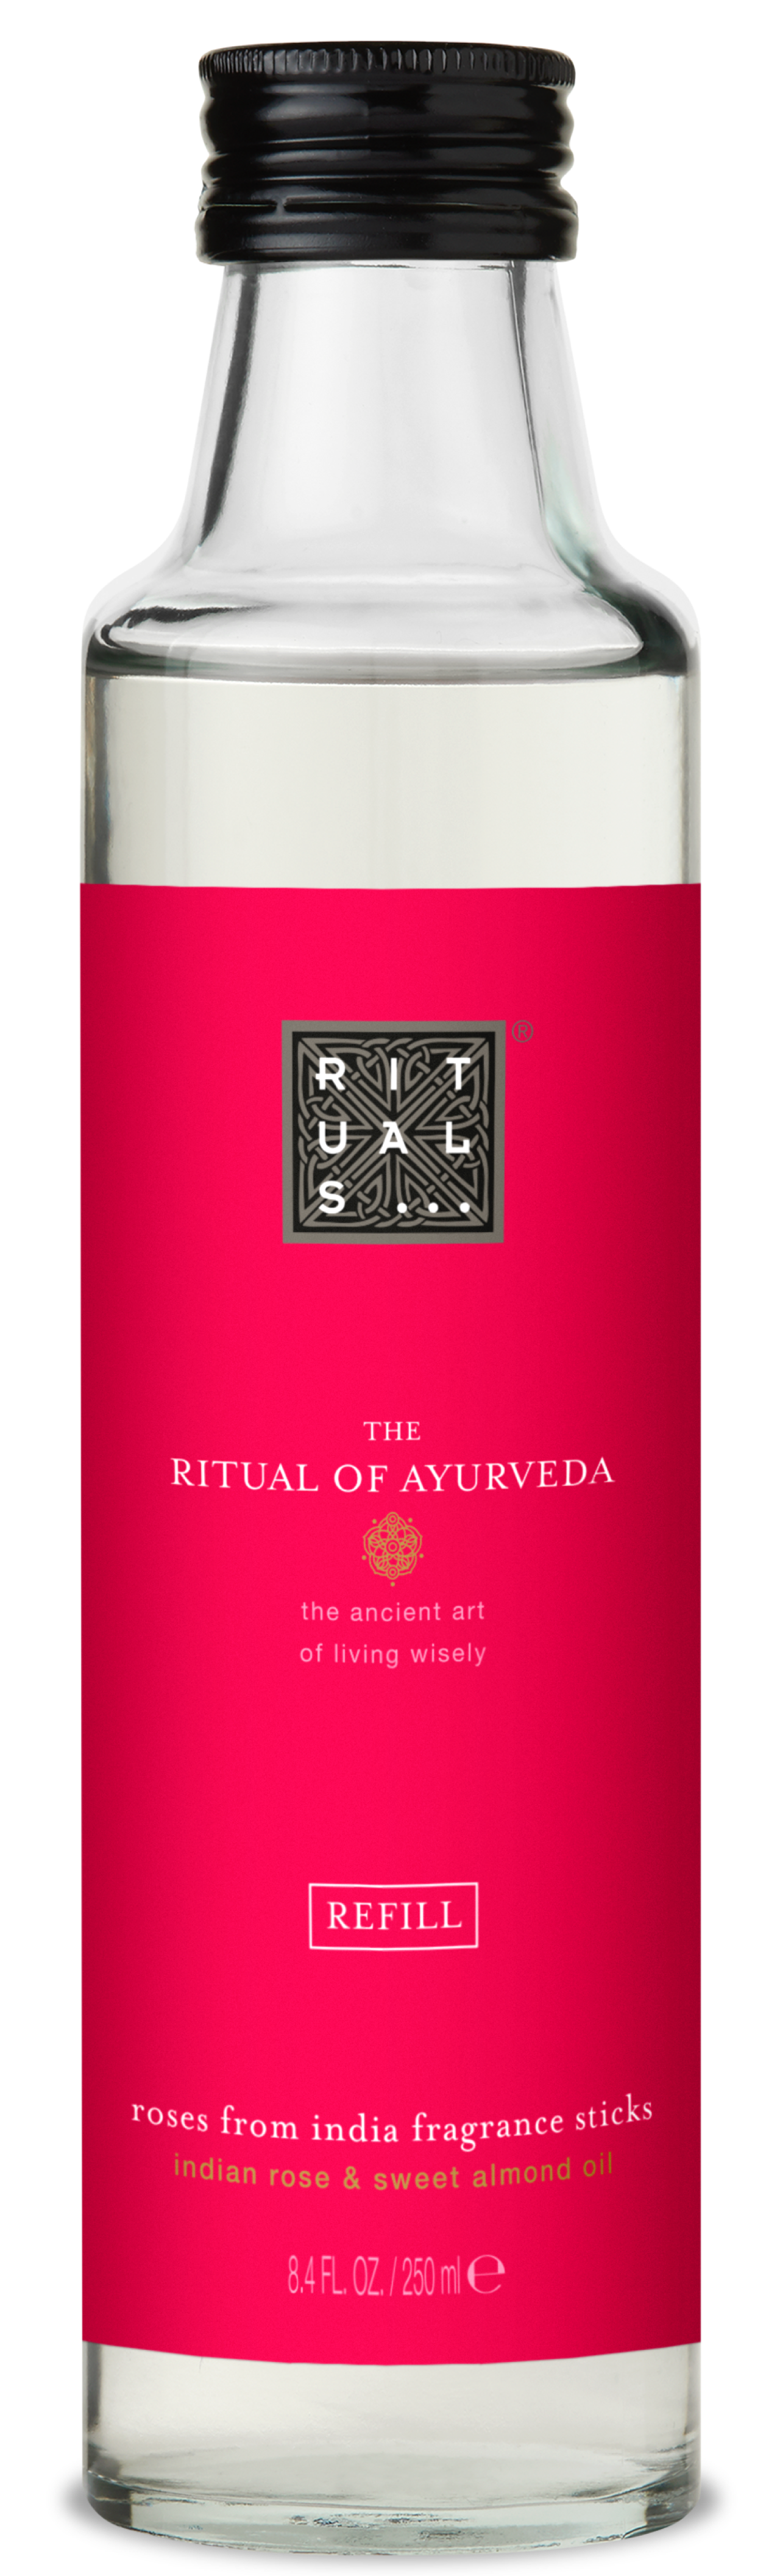 Competitief Lil Verzakking Rituals The Ritual of Ayurveda Home Fragrance Refill for Fragrance Sticks  250 ml | lyko.com